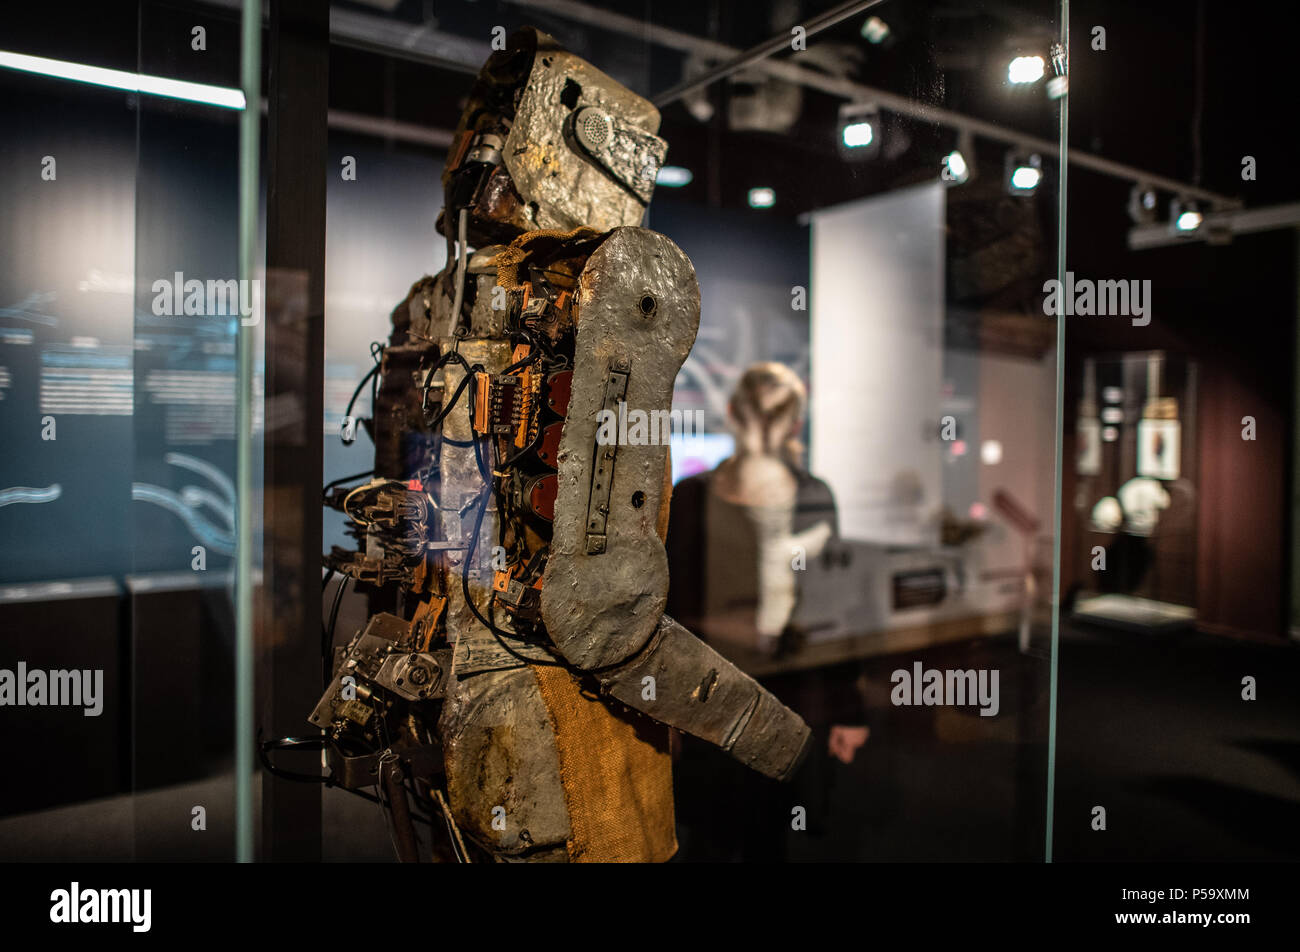 Germany, Muenster. 26th June, 2018. The robot MM7 Selector at the exhibition opening of 'Das Gehirn - Intelligenz, Bewusstsein, Gefühl' (lit. 'The Brain - Intelligence, Consciousness and Feelings') at the LWL Museum for Natural Sciences. Credit: Guido Kirchner/dpa/Alamy Live News Stock Photo